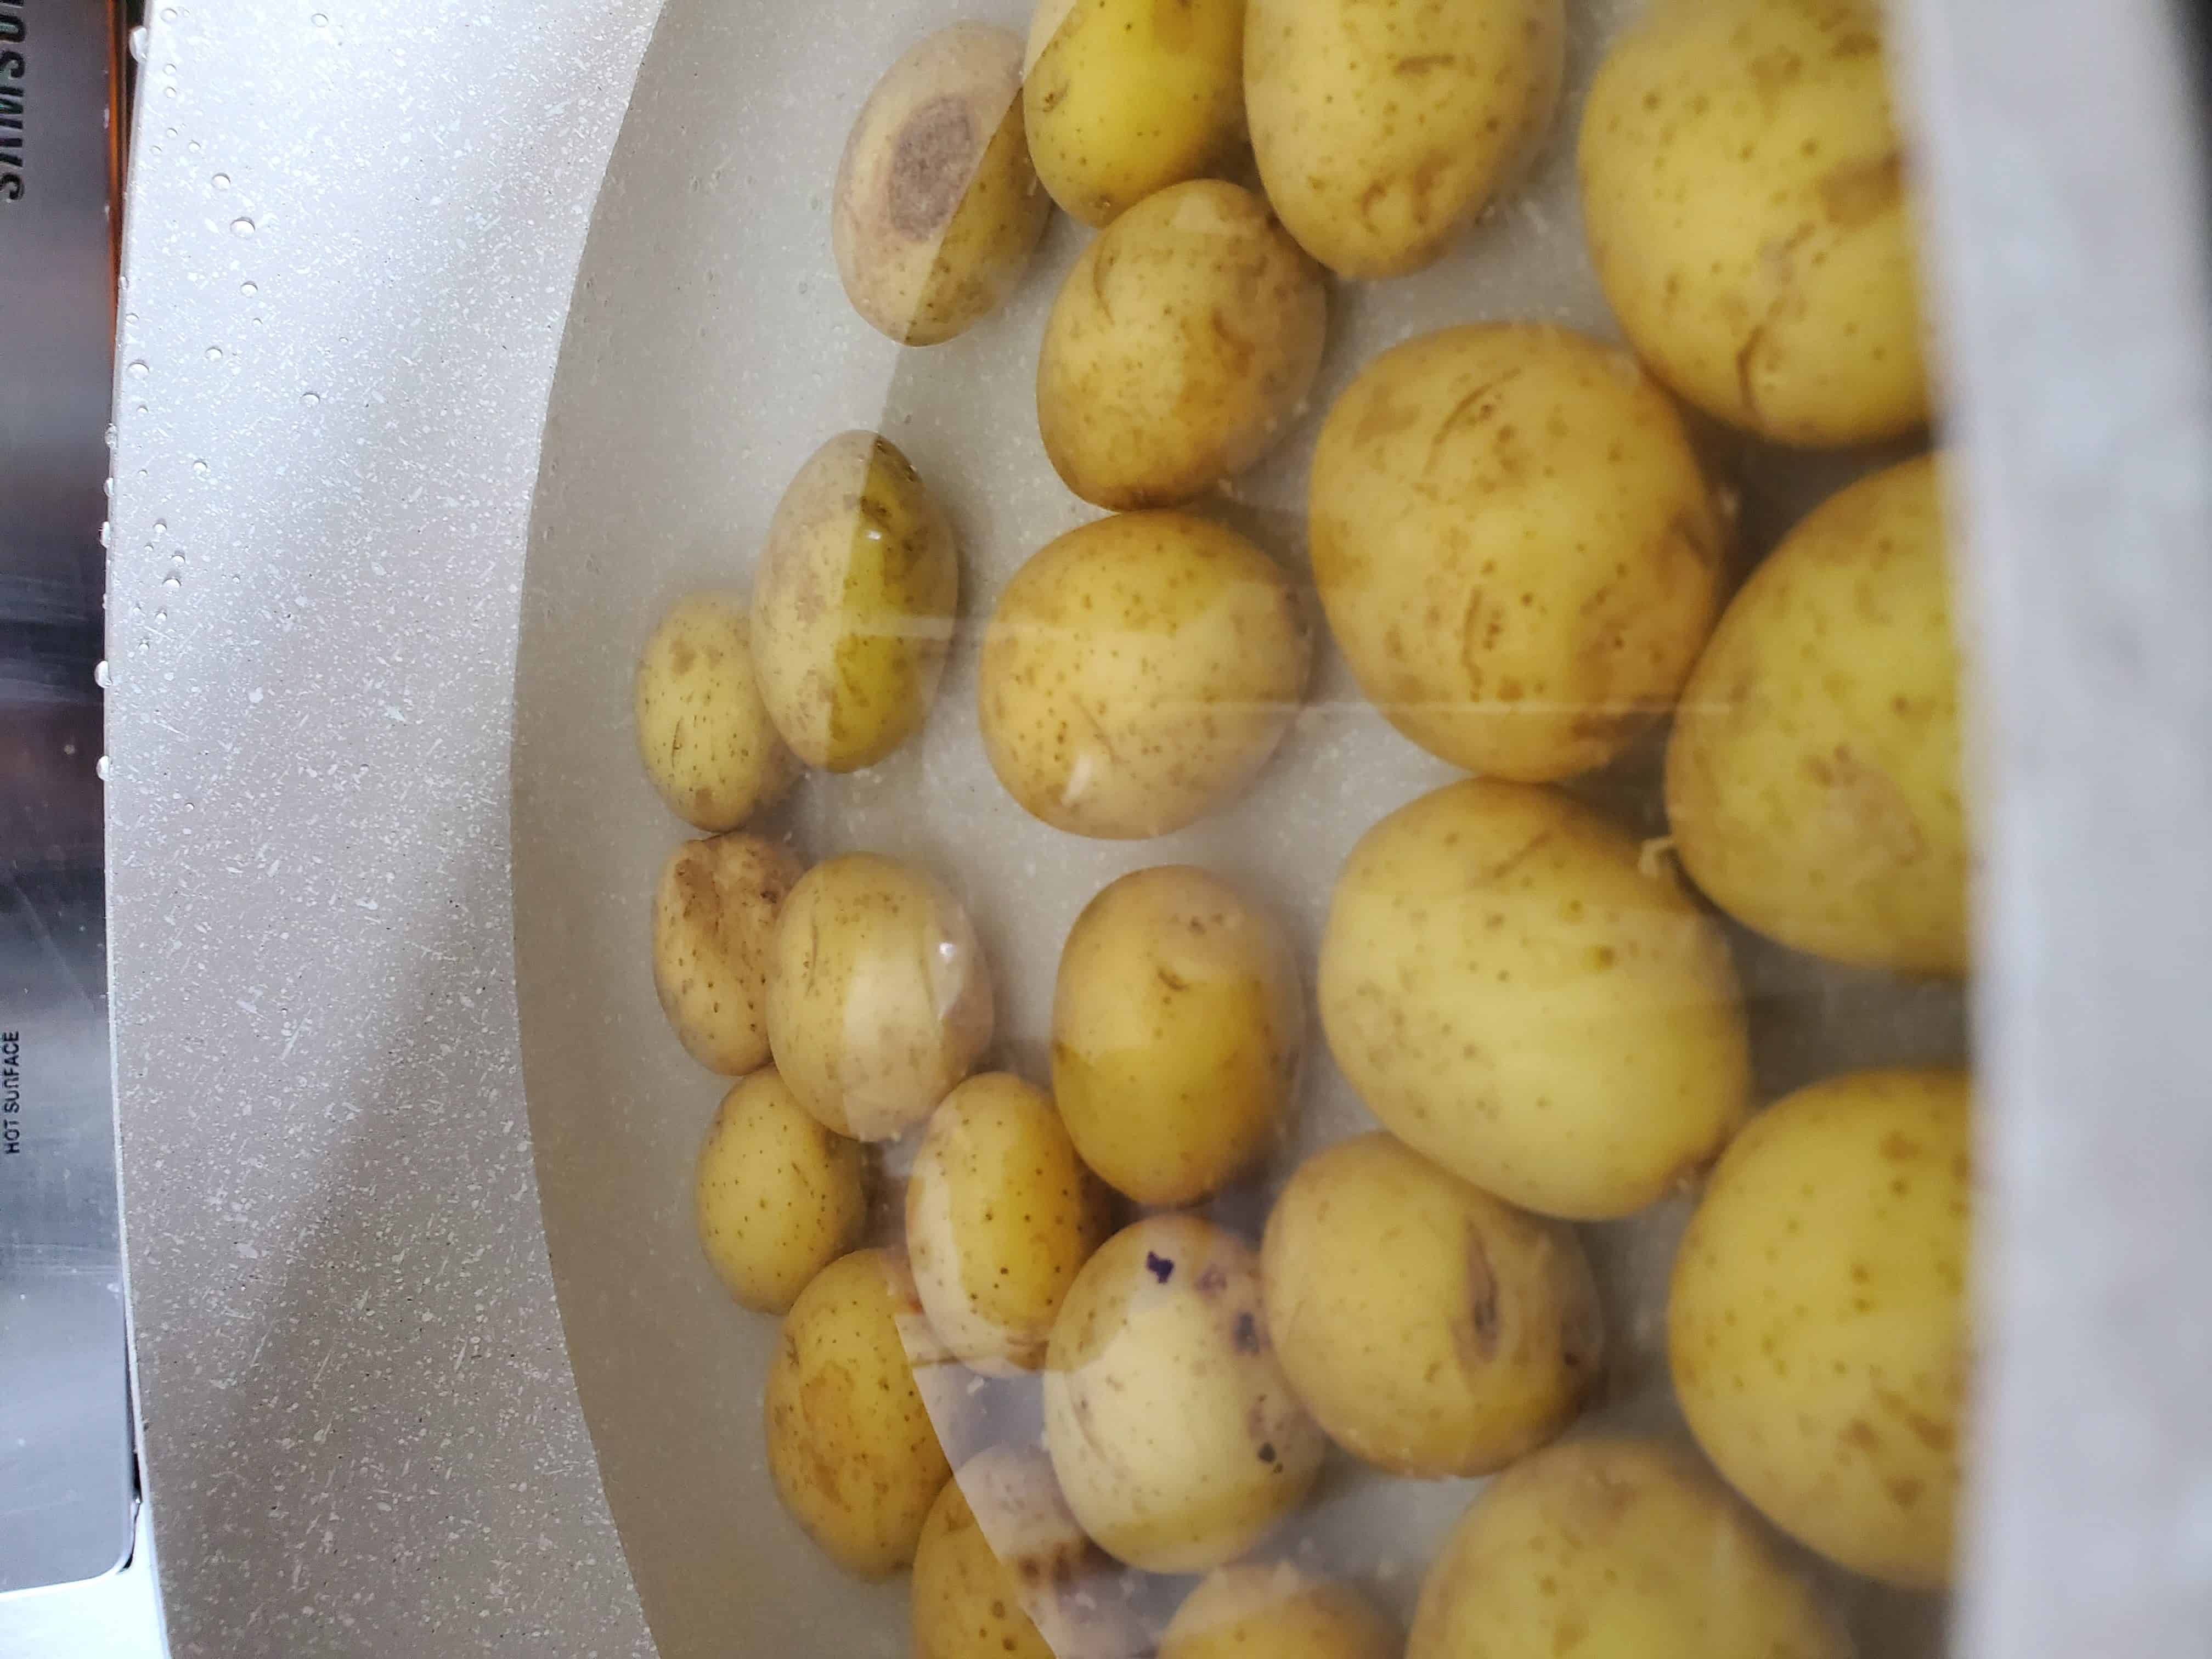 Potatoes covered by an inch of water to boil